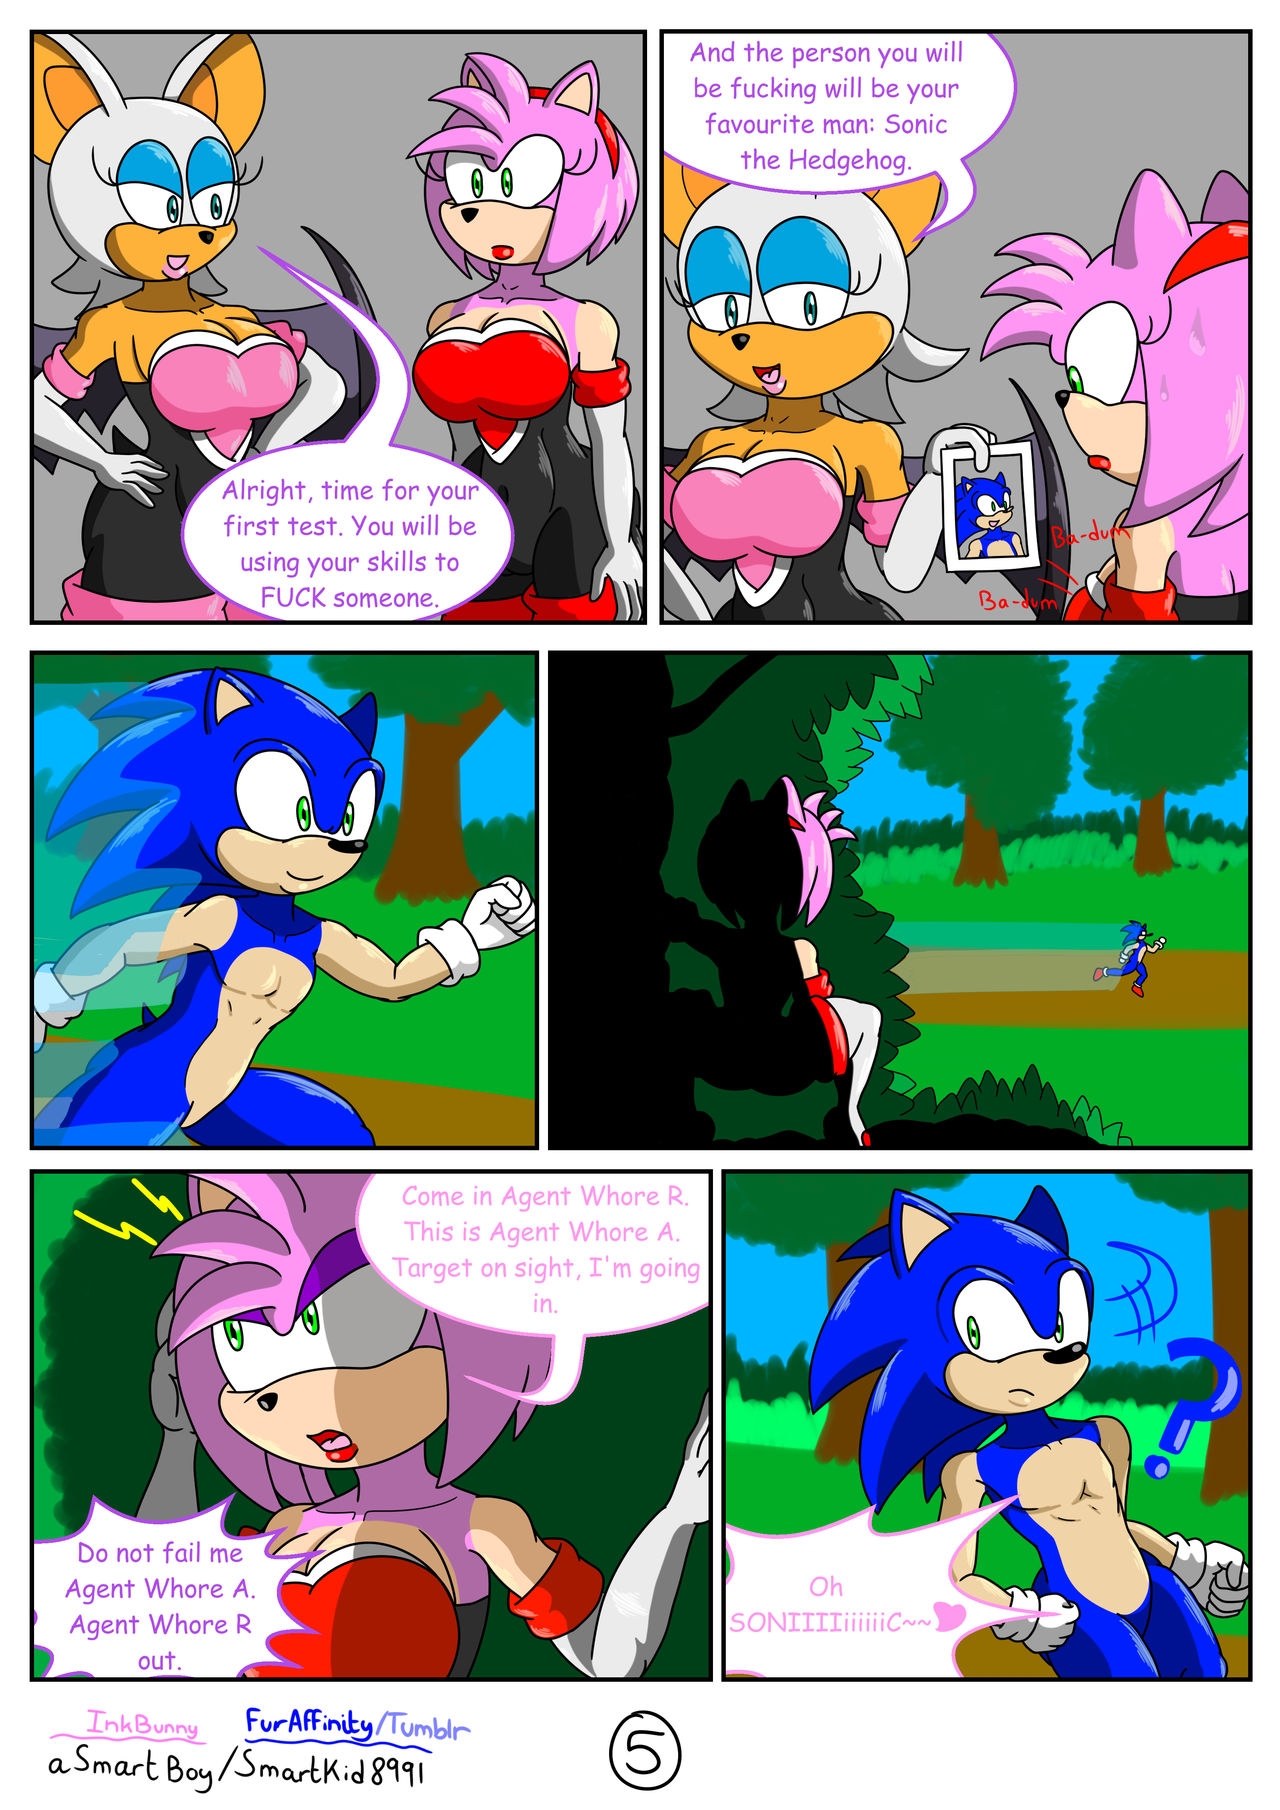 [SmartKid8991] Agent Whore Bootcamp (Sonic The Hedgehog) [Ongoing] 5